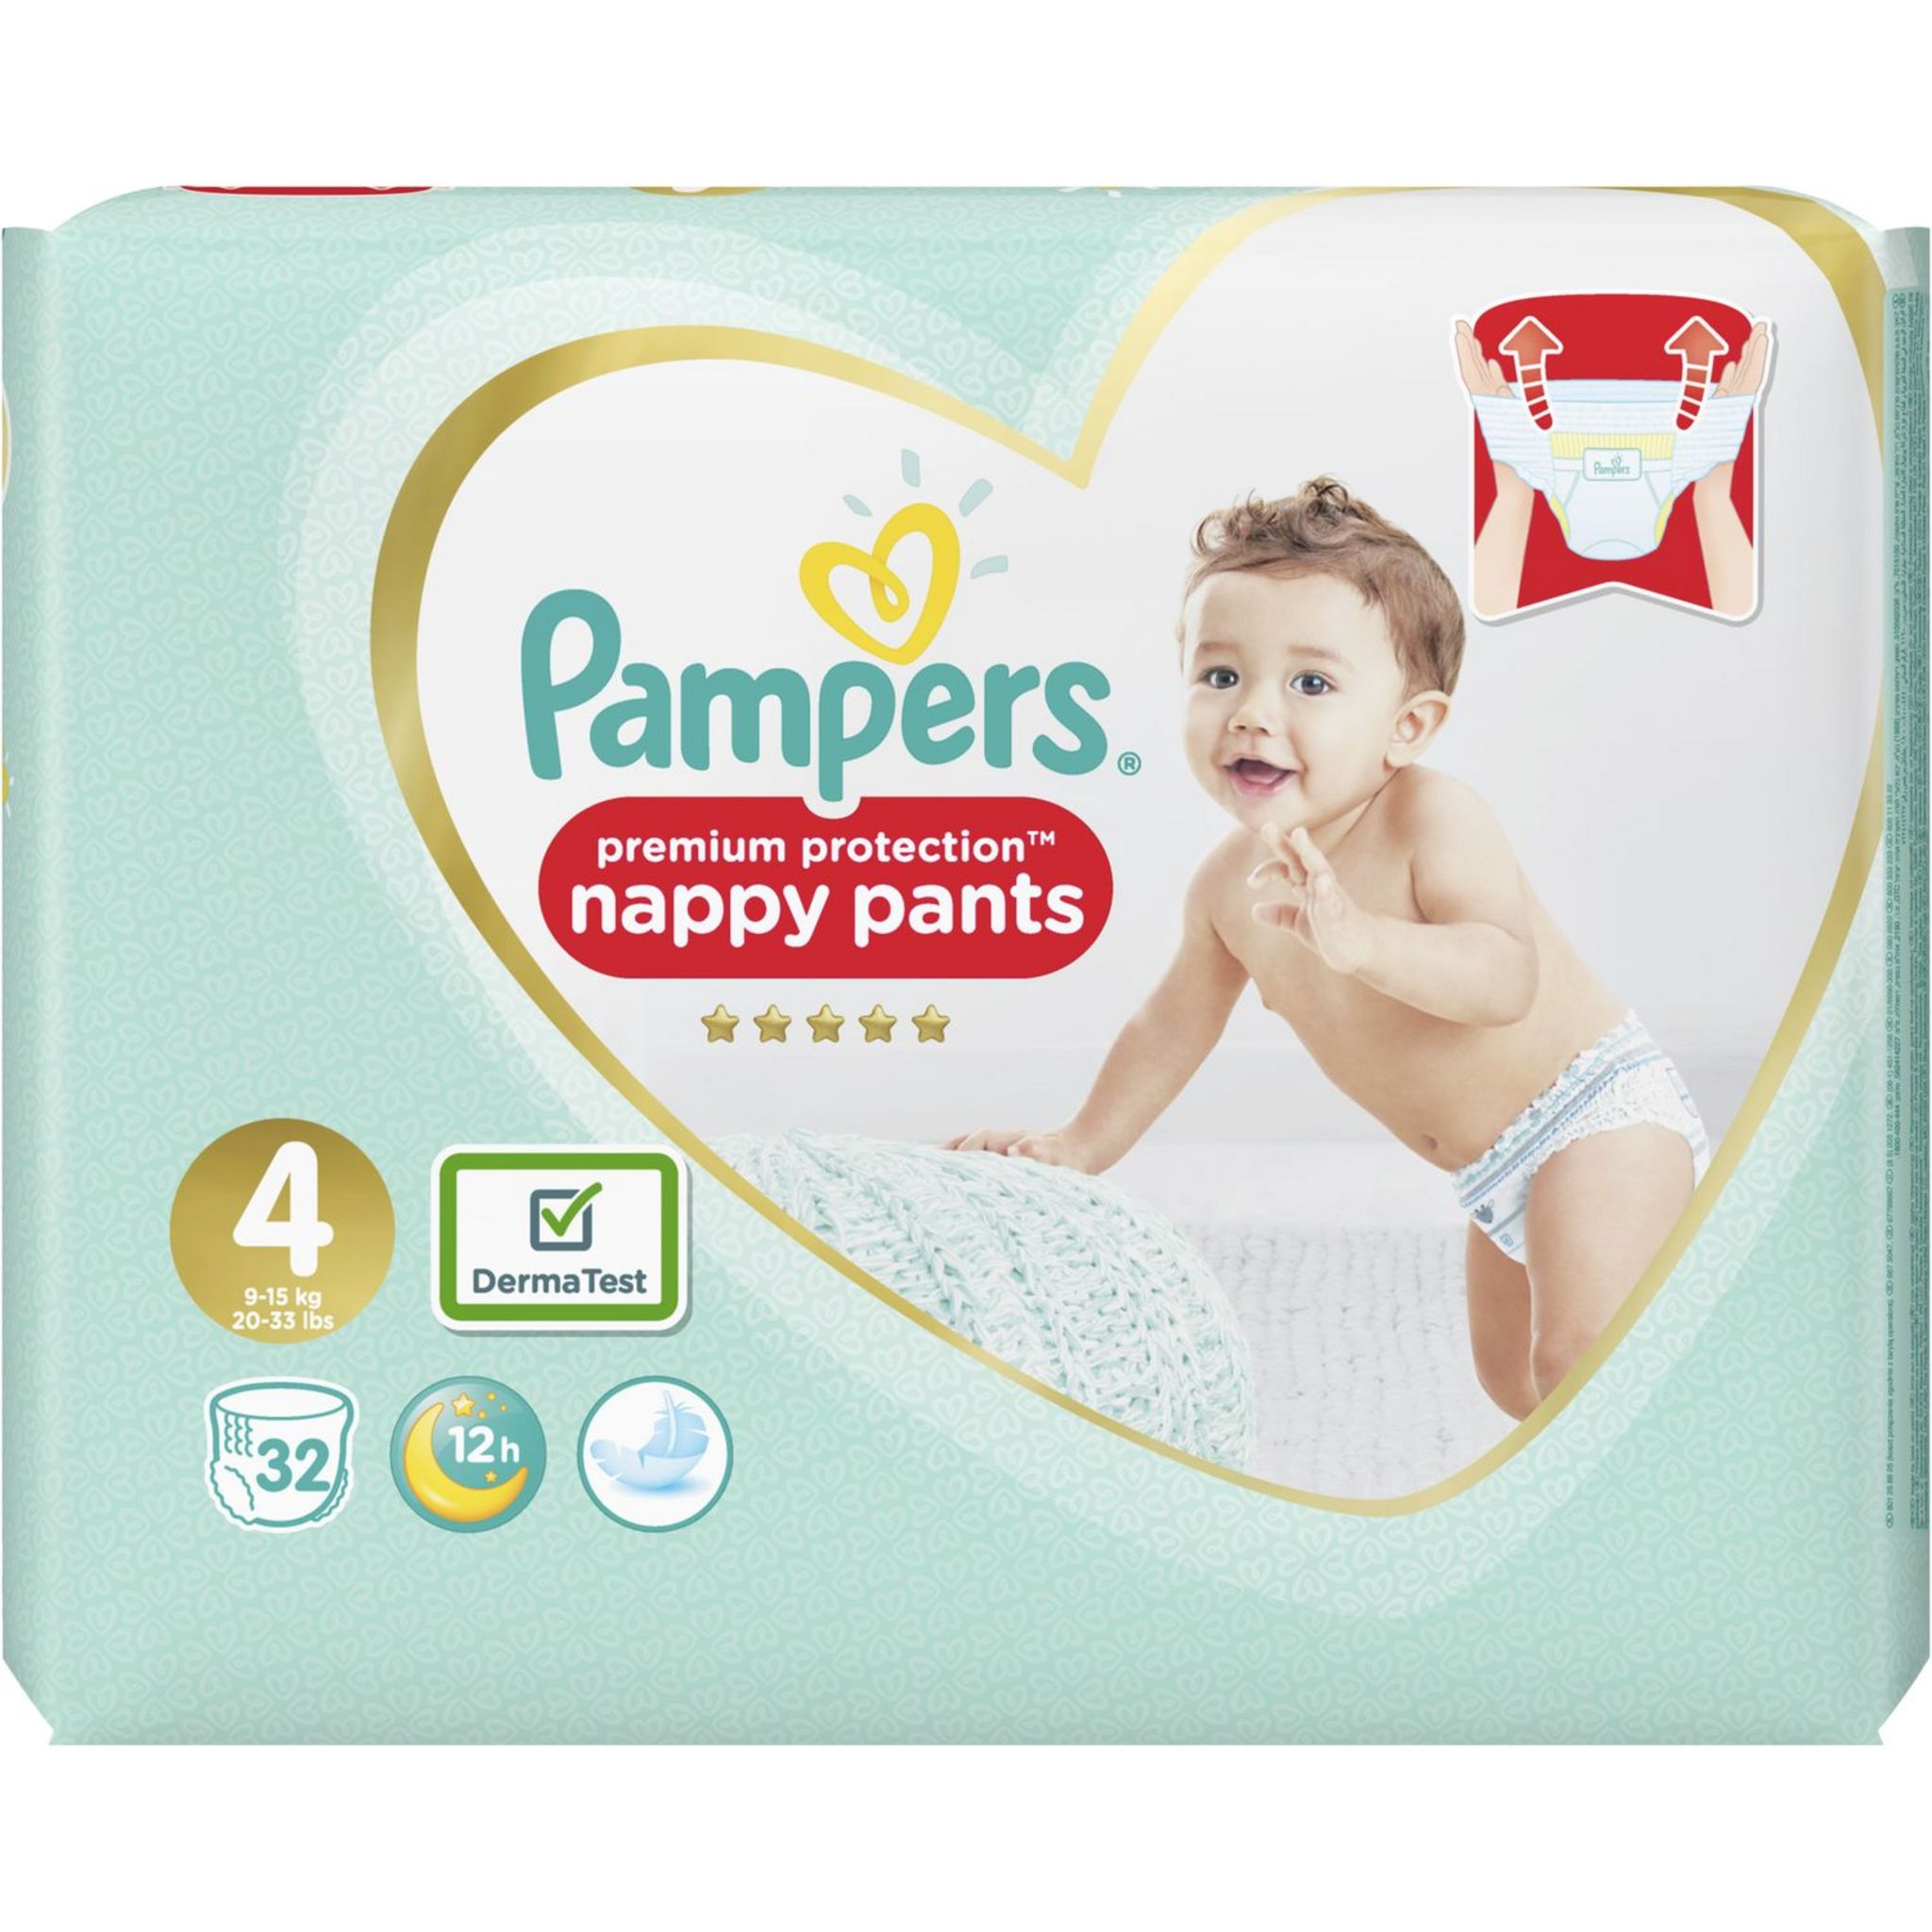 Pampers - Couches-culottes Pants, taille 8, 19+ kg, 32 pcs 